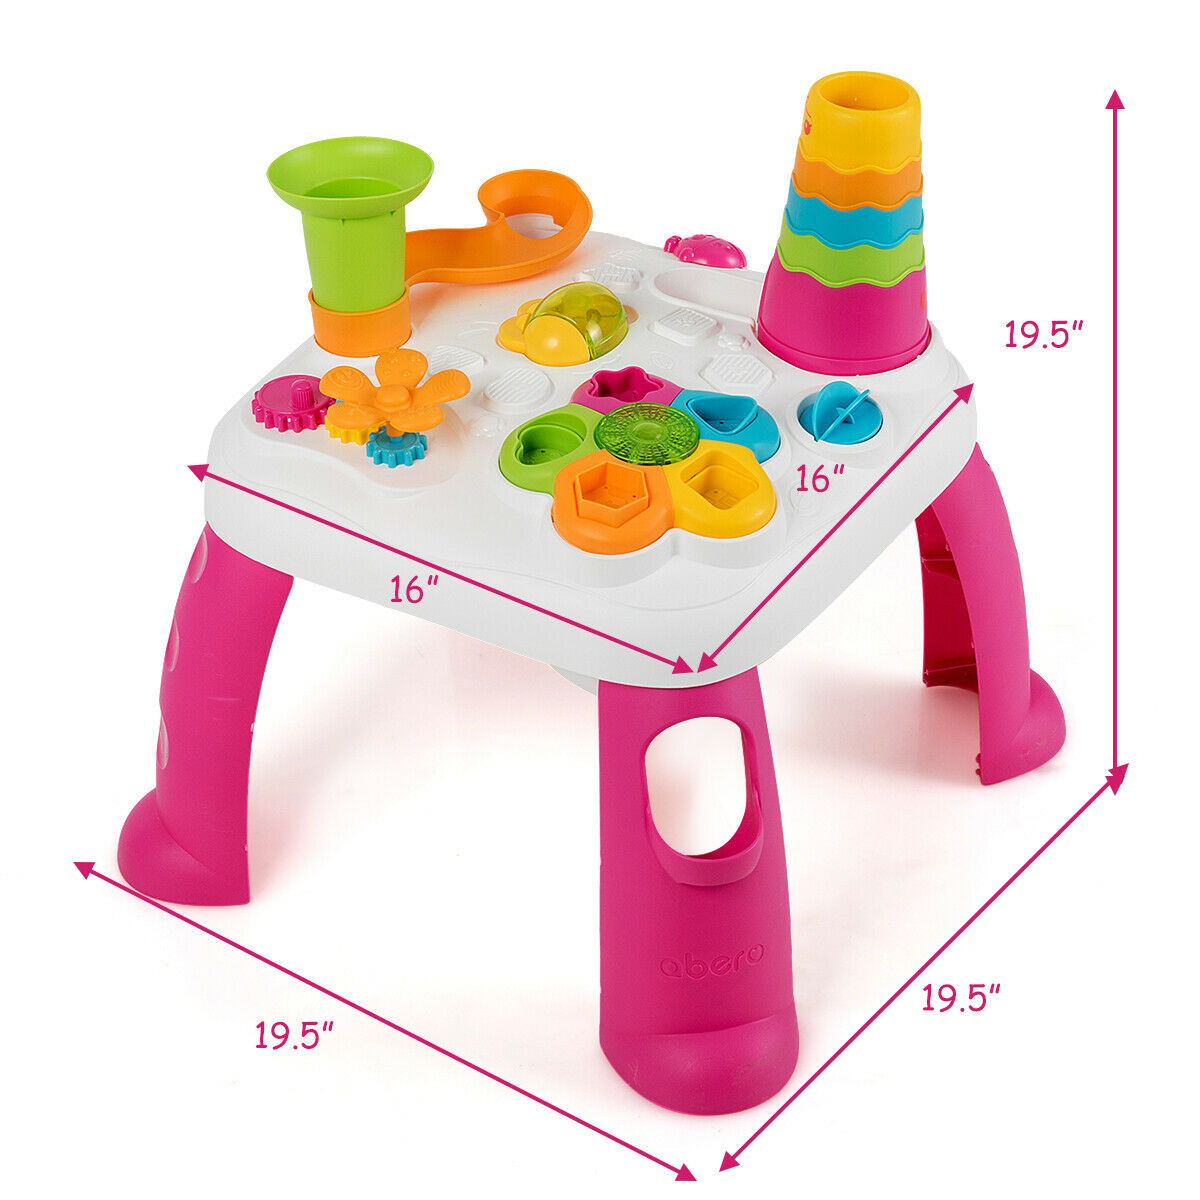 stand and play activity center